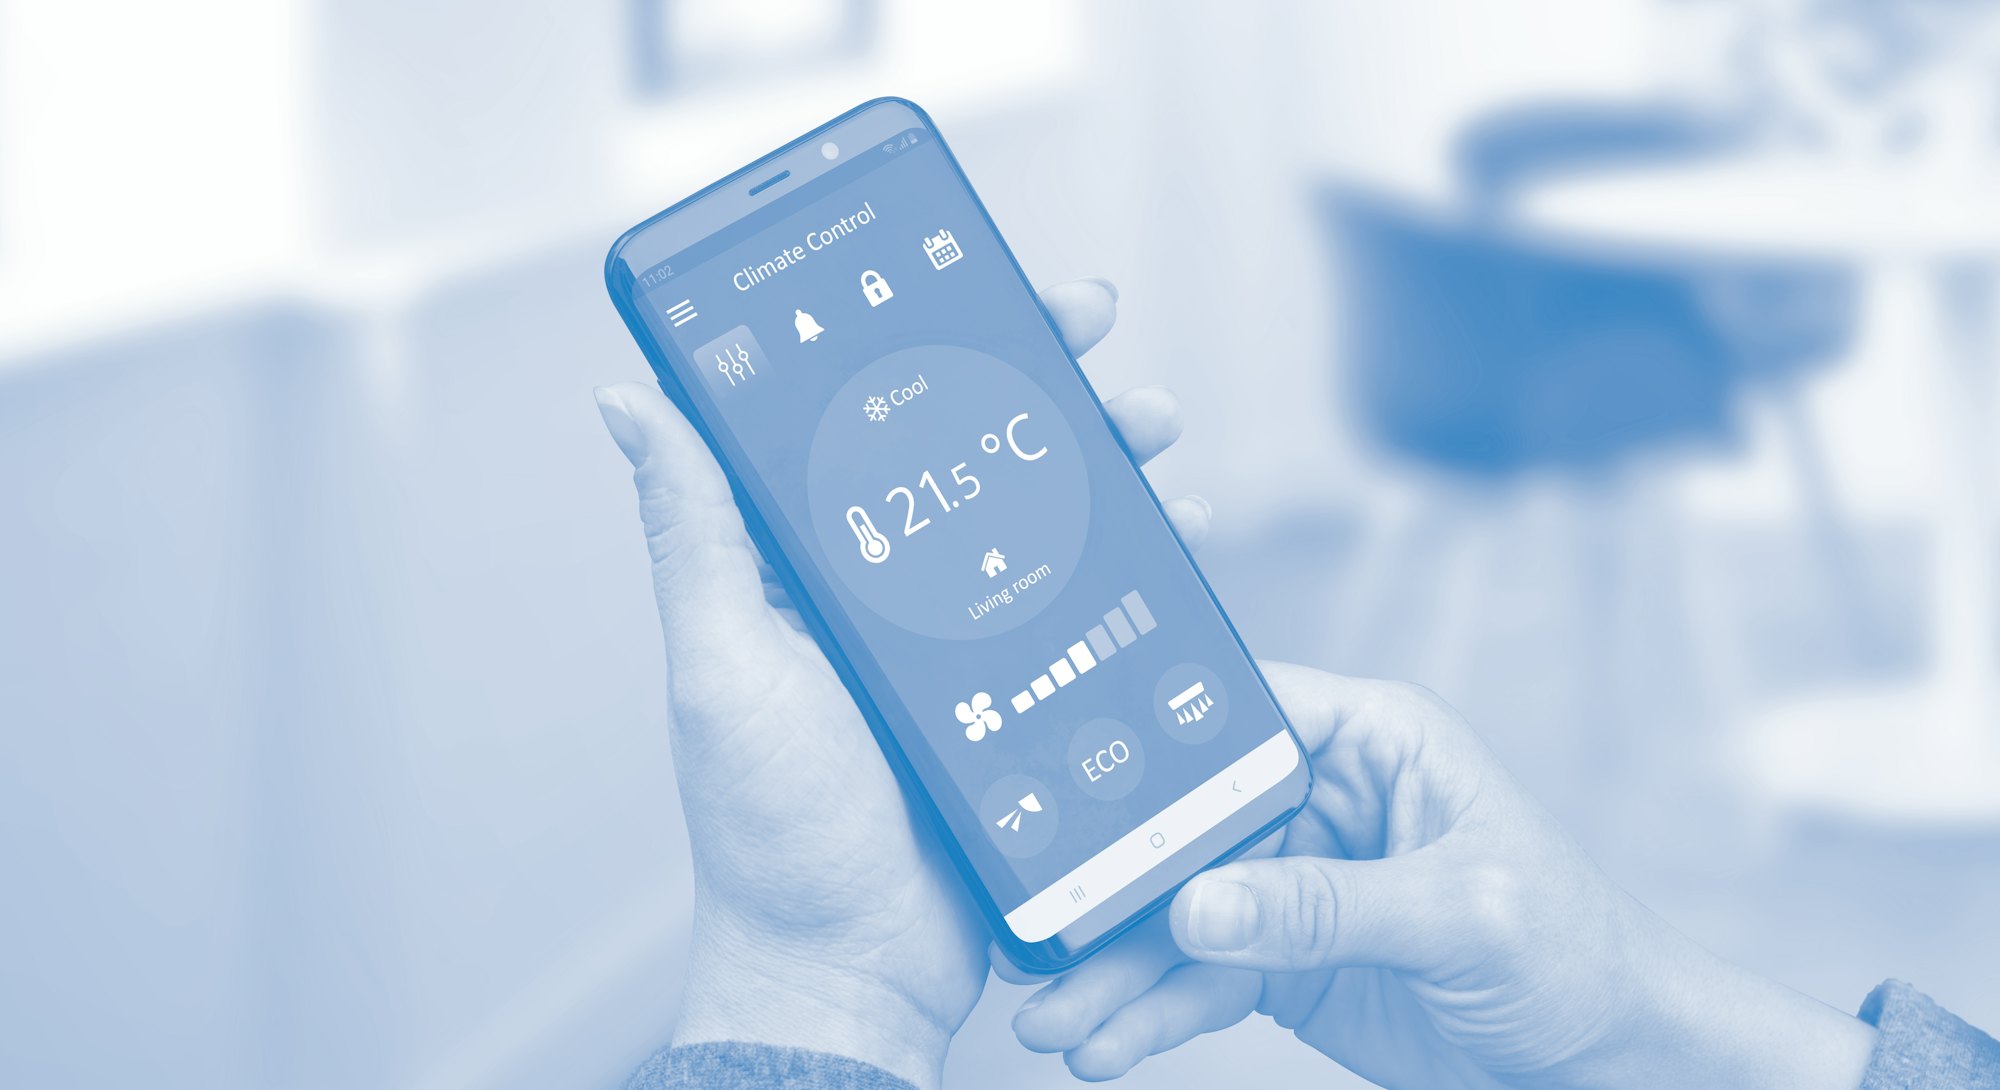 Heat control in the house with simple app on phone for remote control of air conditioners. The conce...